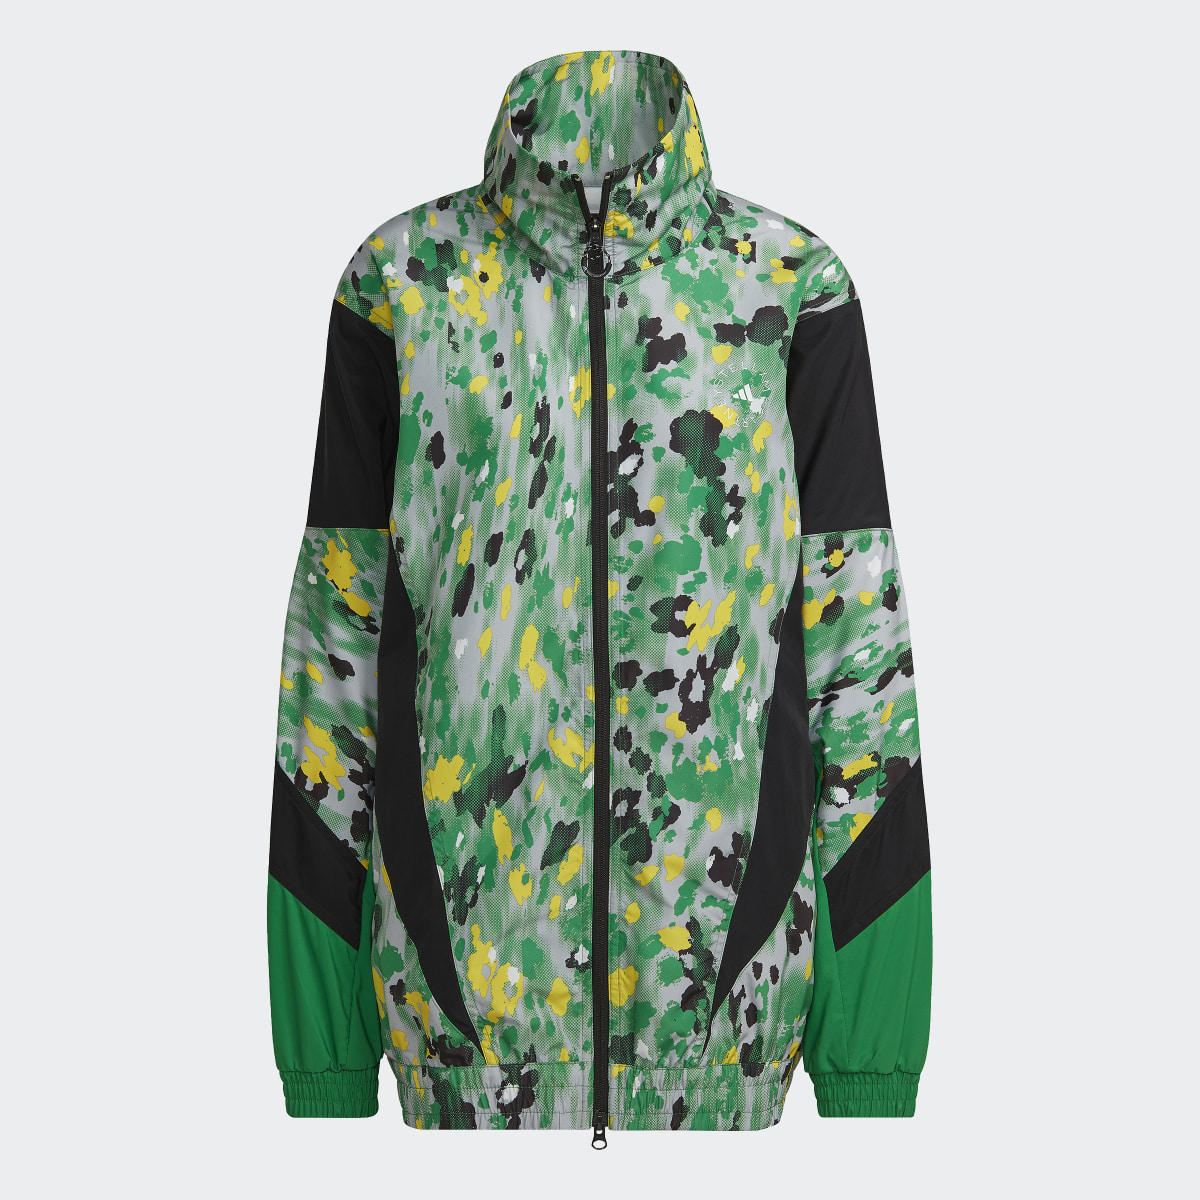 Adidas by Stella McCartney Printed Woven Track Top. 7